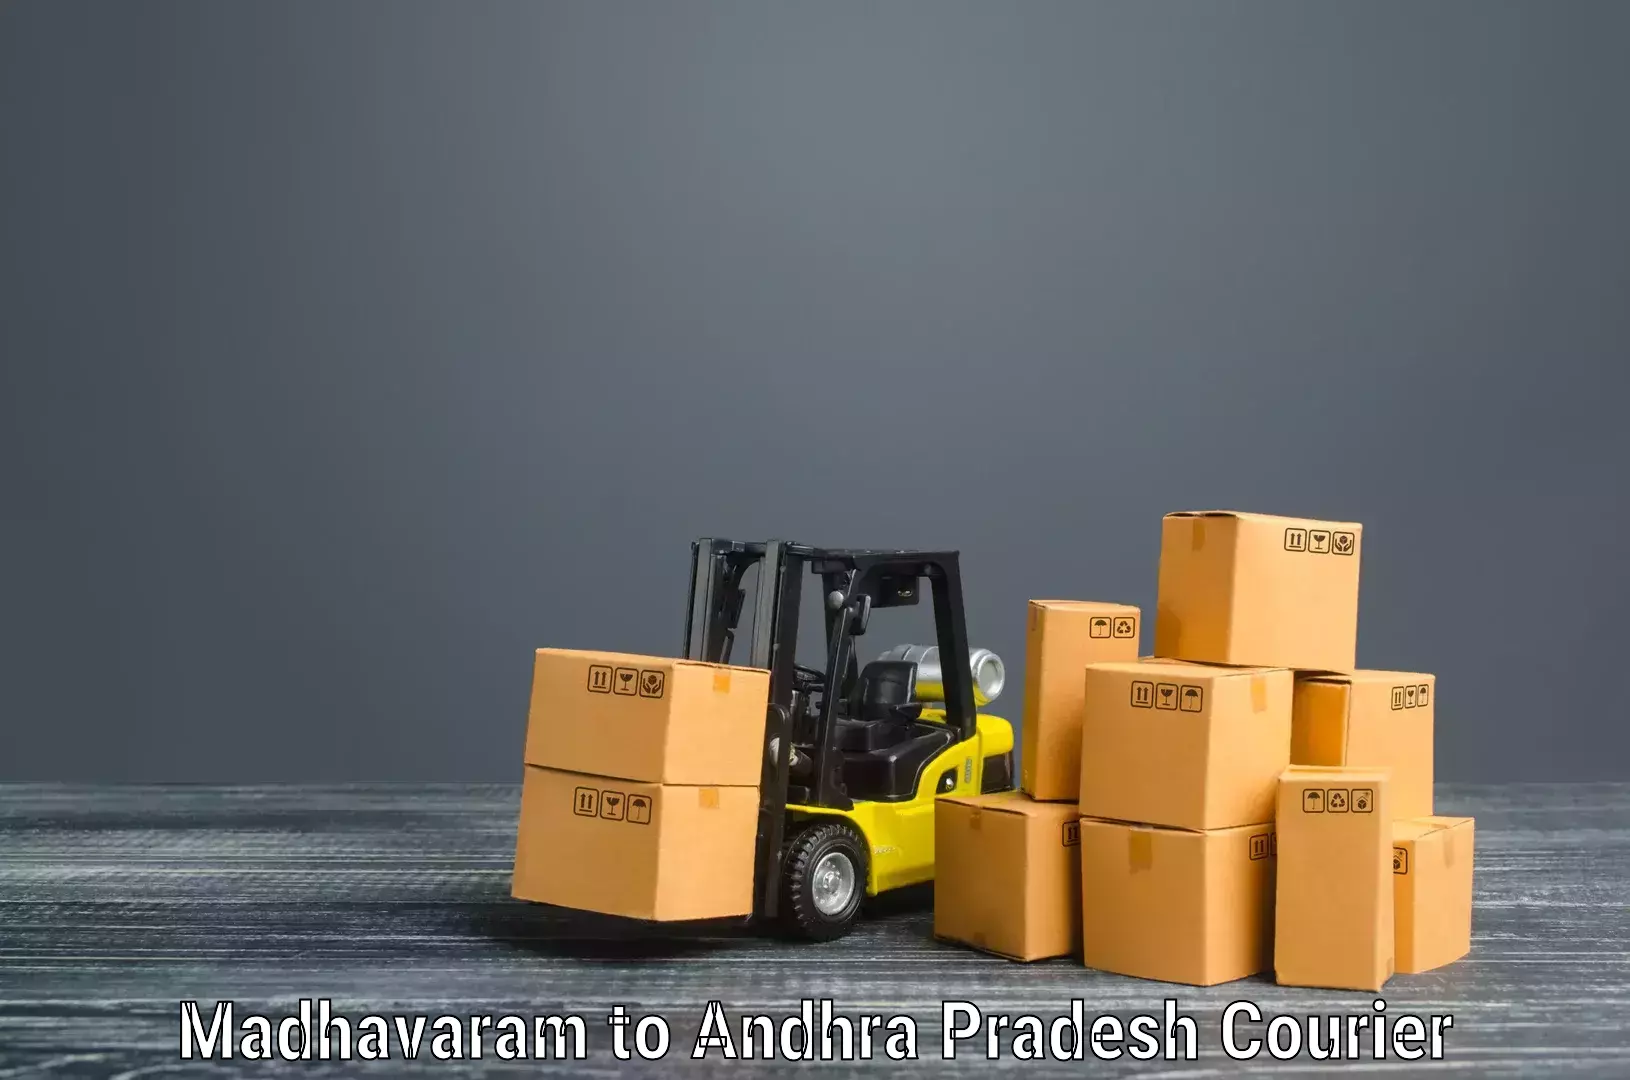 Budget-friendly movers in Madhavaram to Gopalapatnam